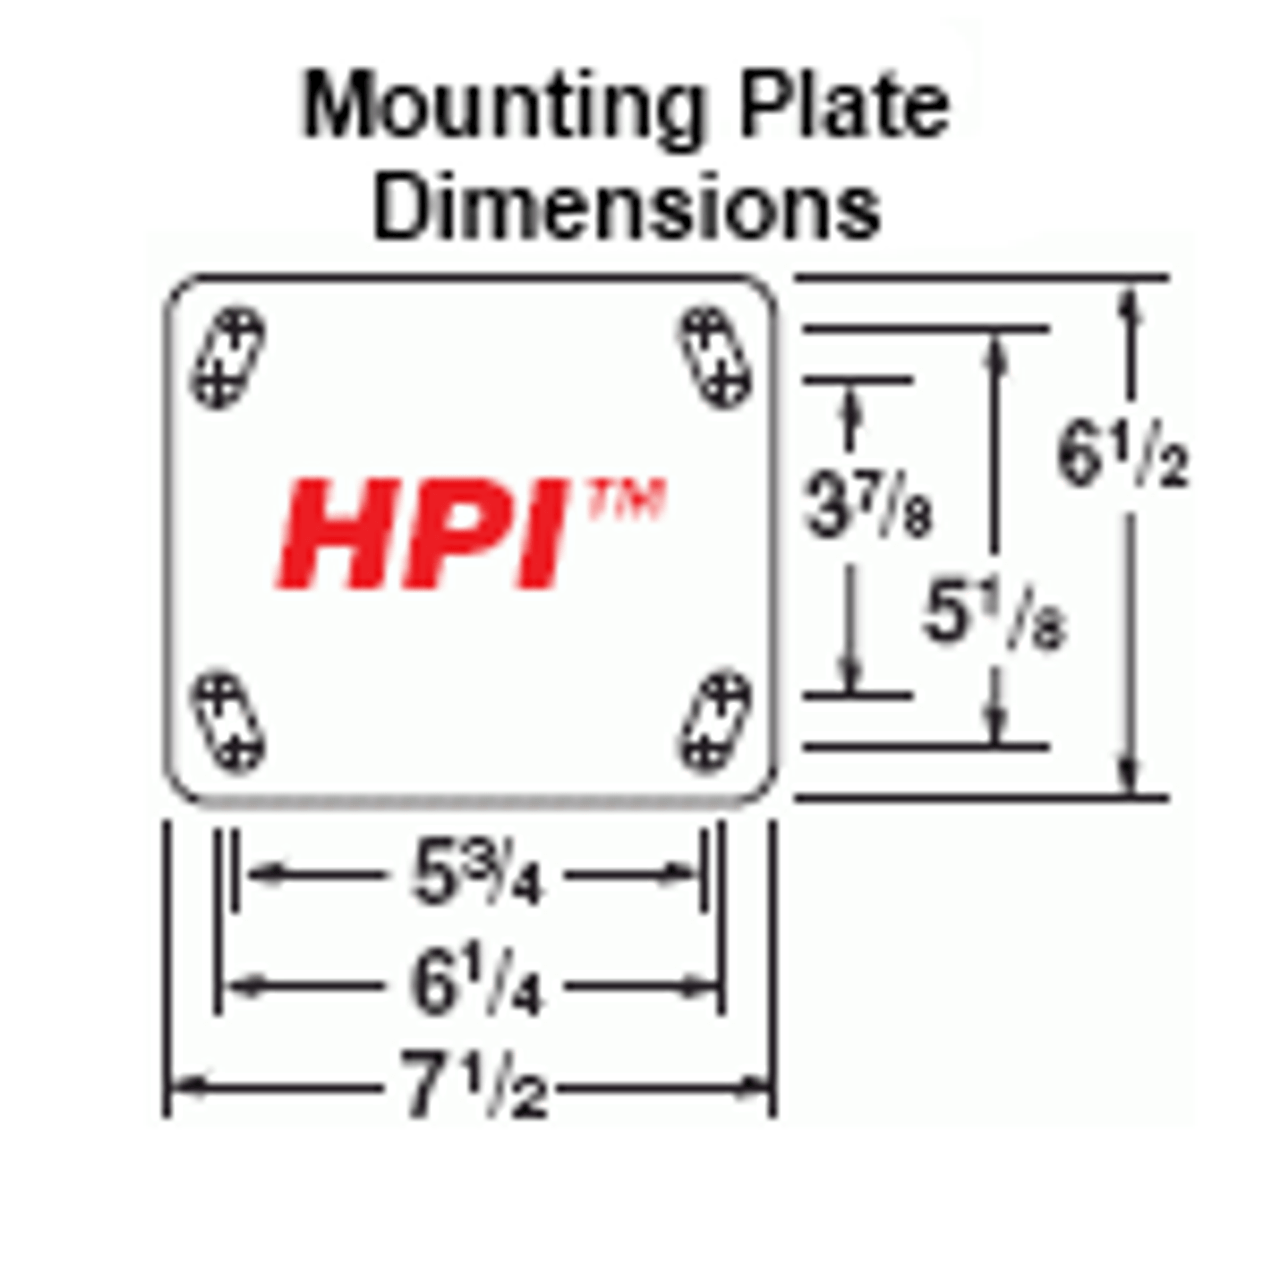 6.5 x 7.5 Plate Dimensions